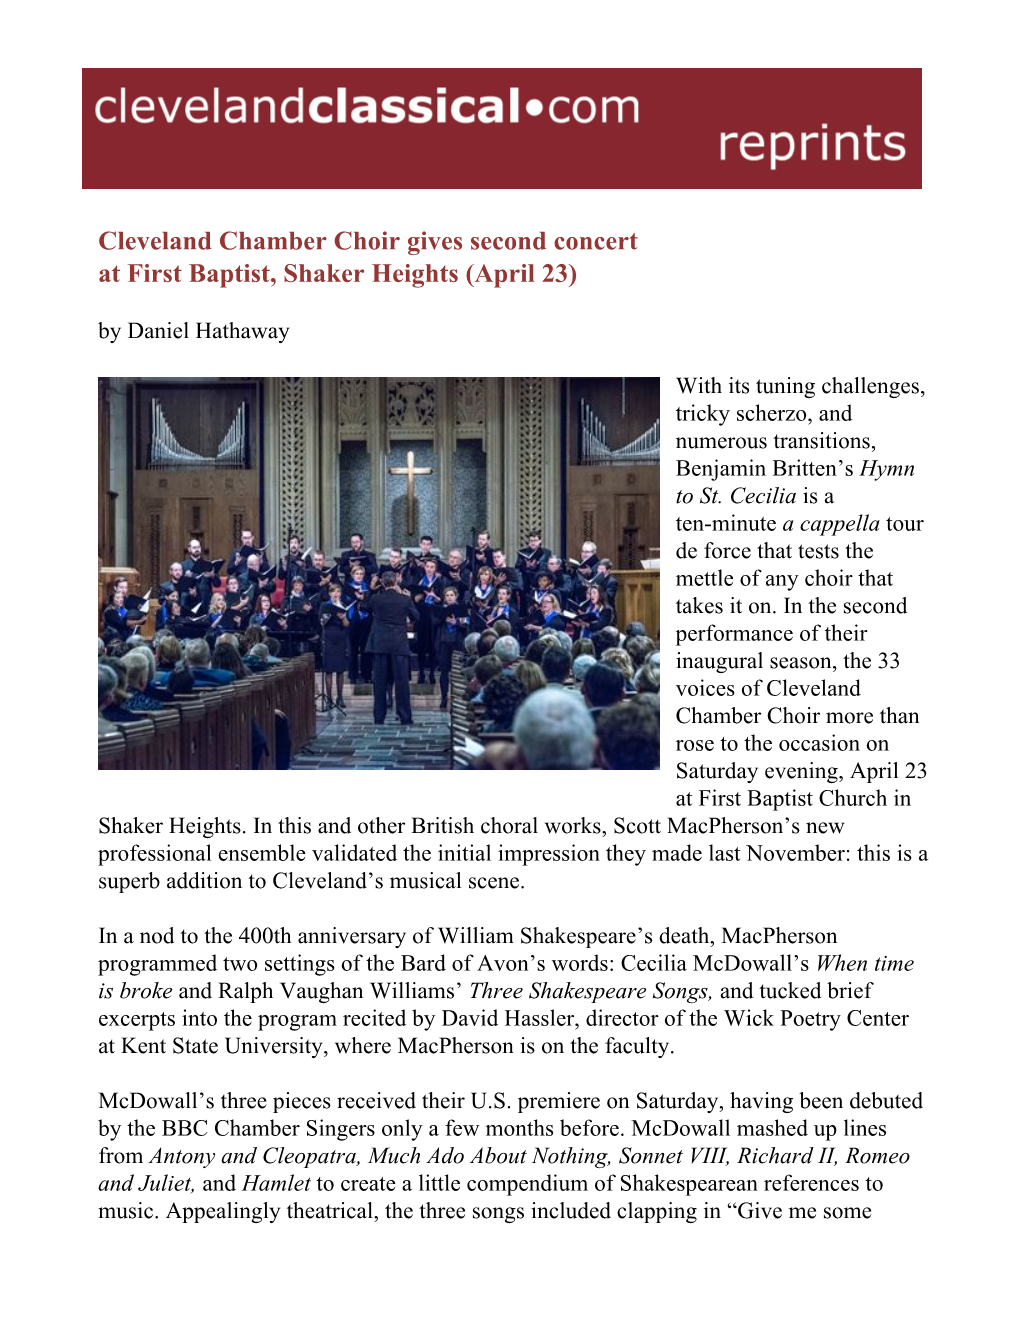 Cleveland Chamber Choir Gives Second Concert at First Baptist, Shaker Heights (April 23) by Daniel Hathaway